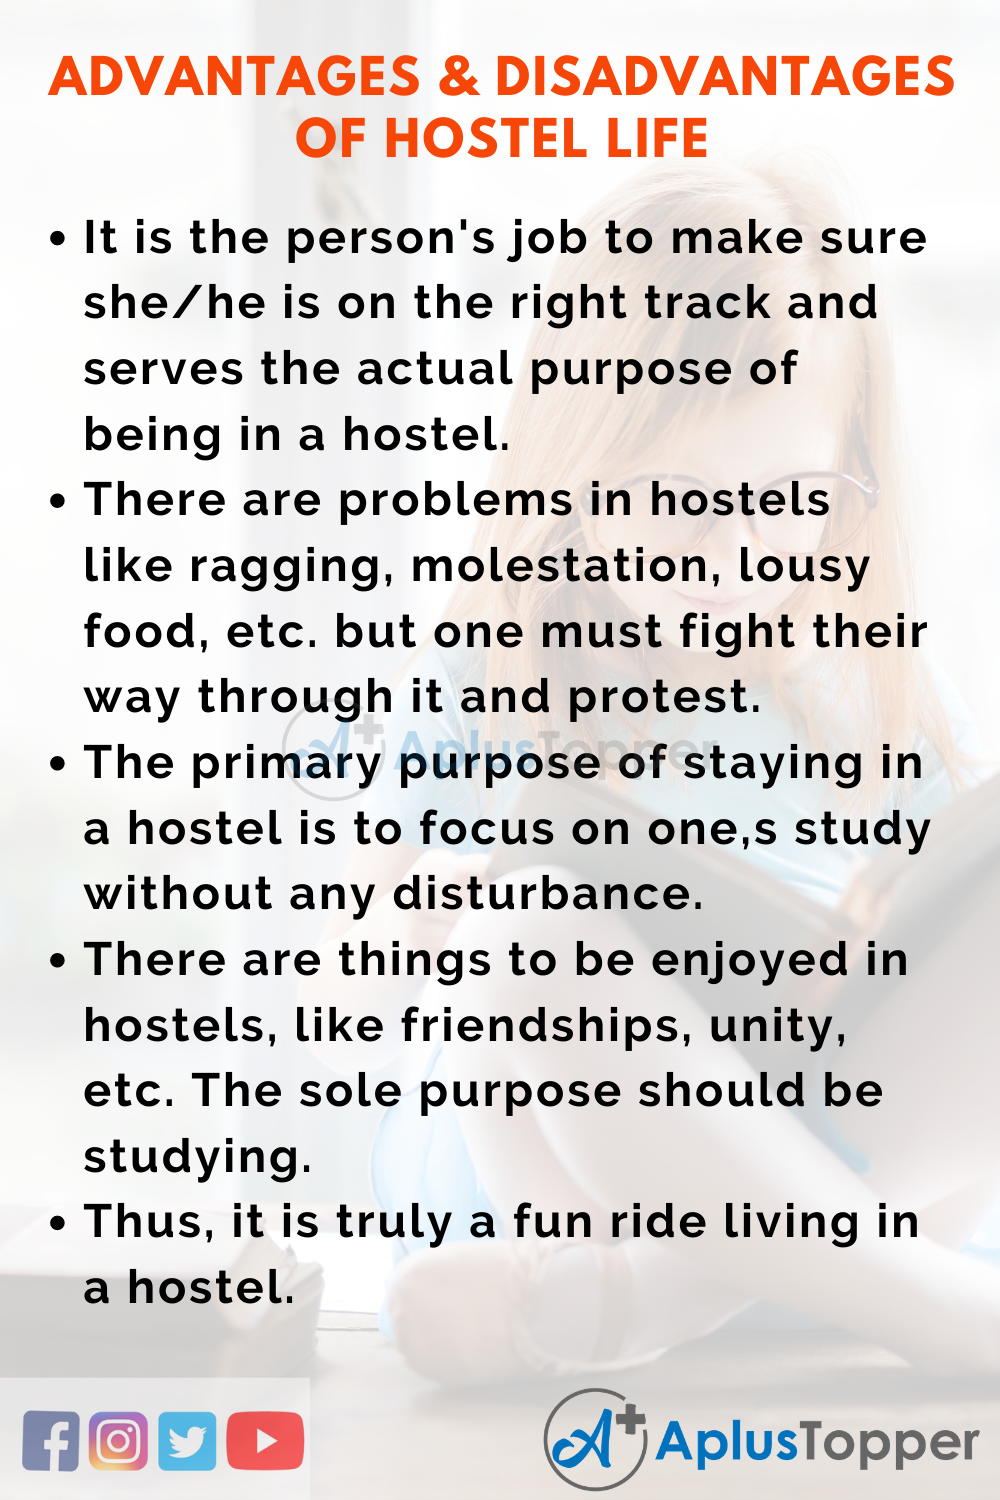 Short Speech On Advantages And Disadvantages Of Hostel Life 150 Words In English